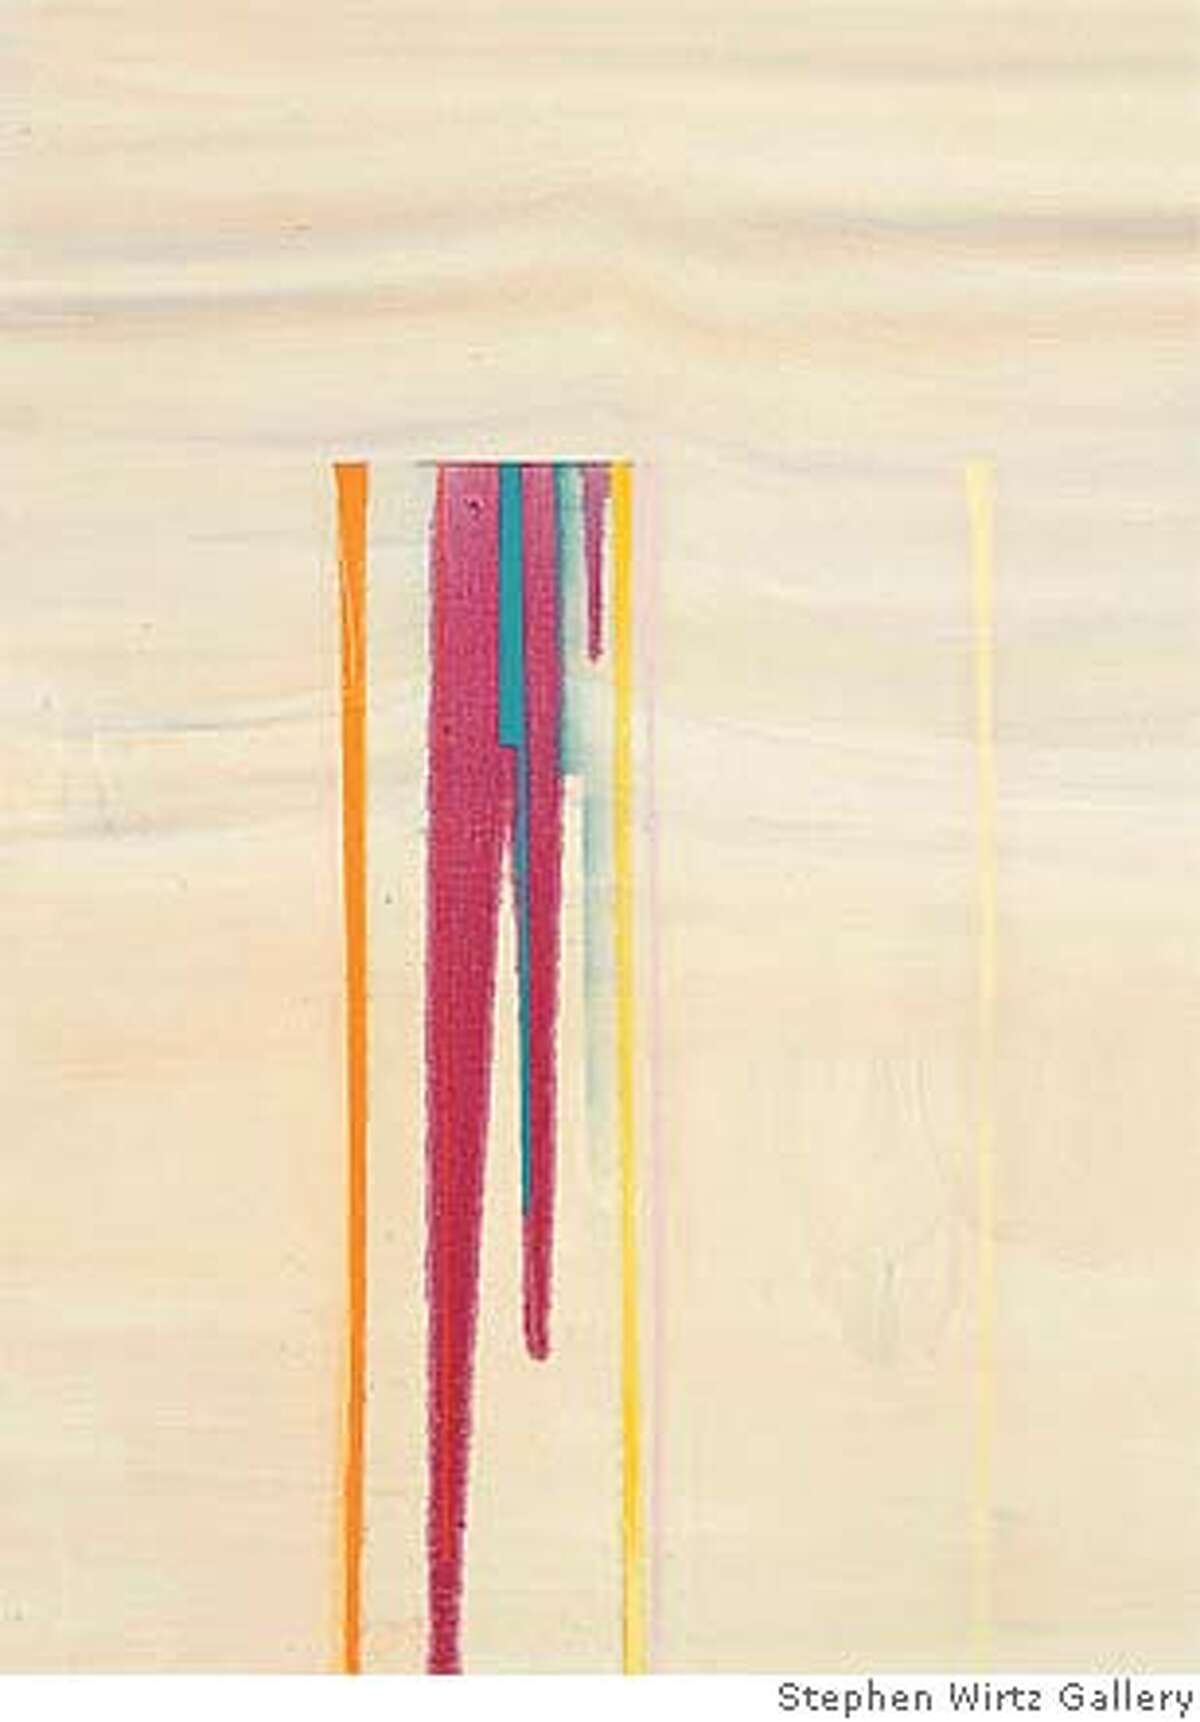 Kathryn Van Dyke's "Yellow Sea, 9 Drips" (2006), oil on canvas, at Stephen Wirtz Gallery. Photo courtesy of Stephen Wirtz Gallery